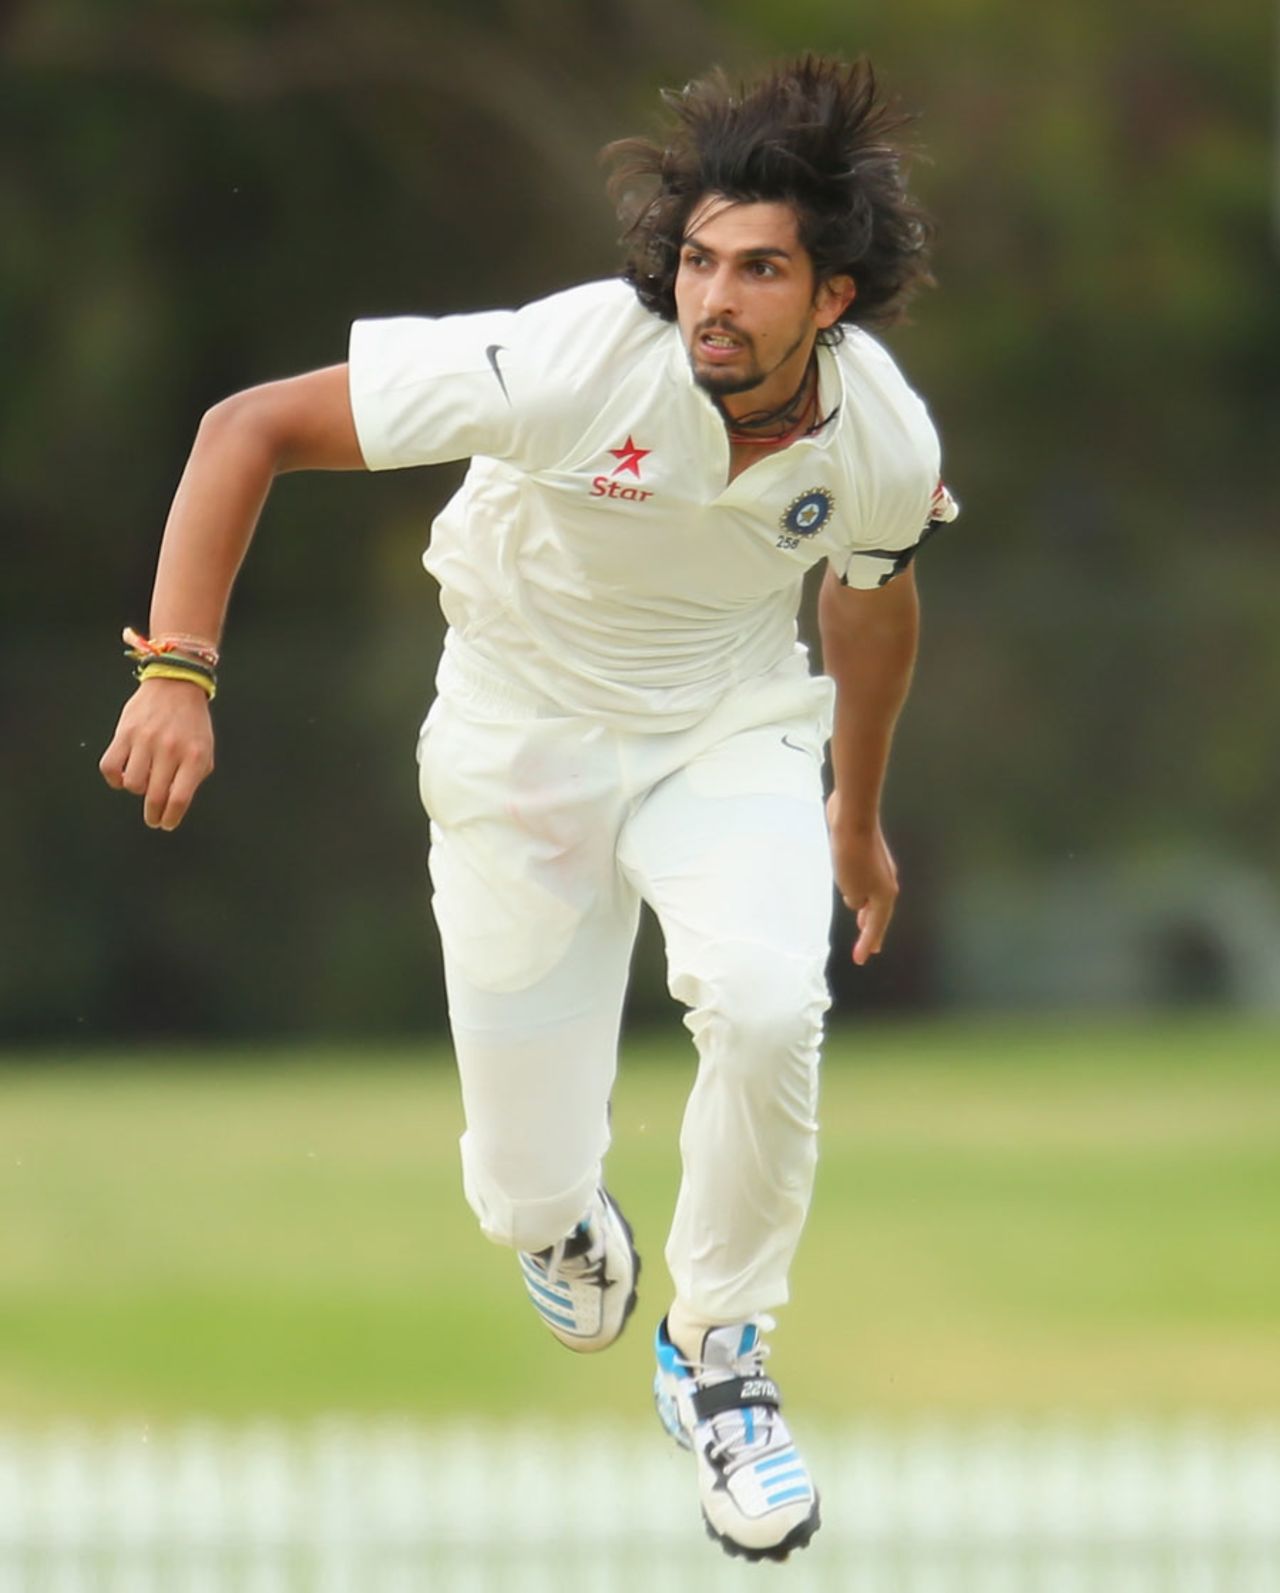 Ishant Sharma hurls in a delivery, Cricket Australia XI v Indians, Tour match, Adelaide, 1st day, December 4, 2014